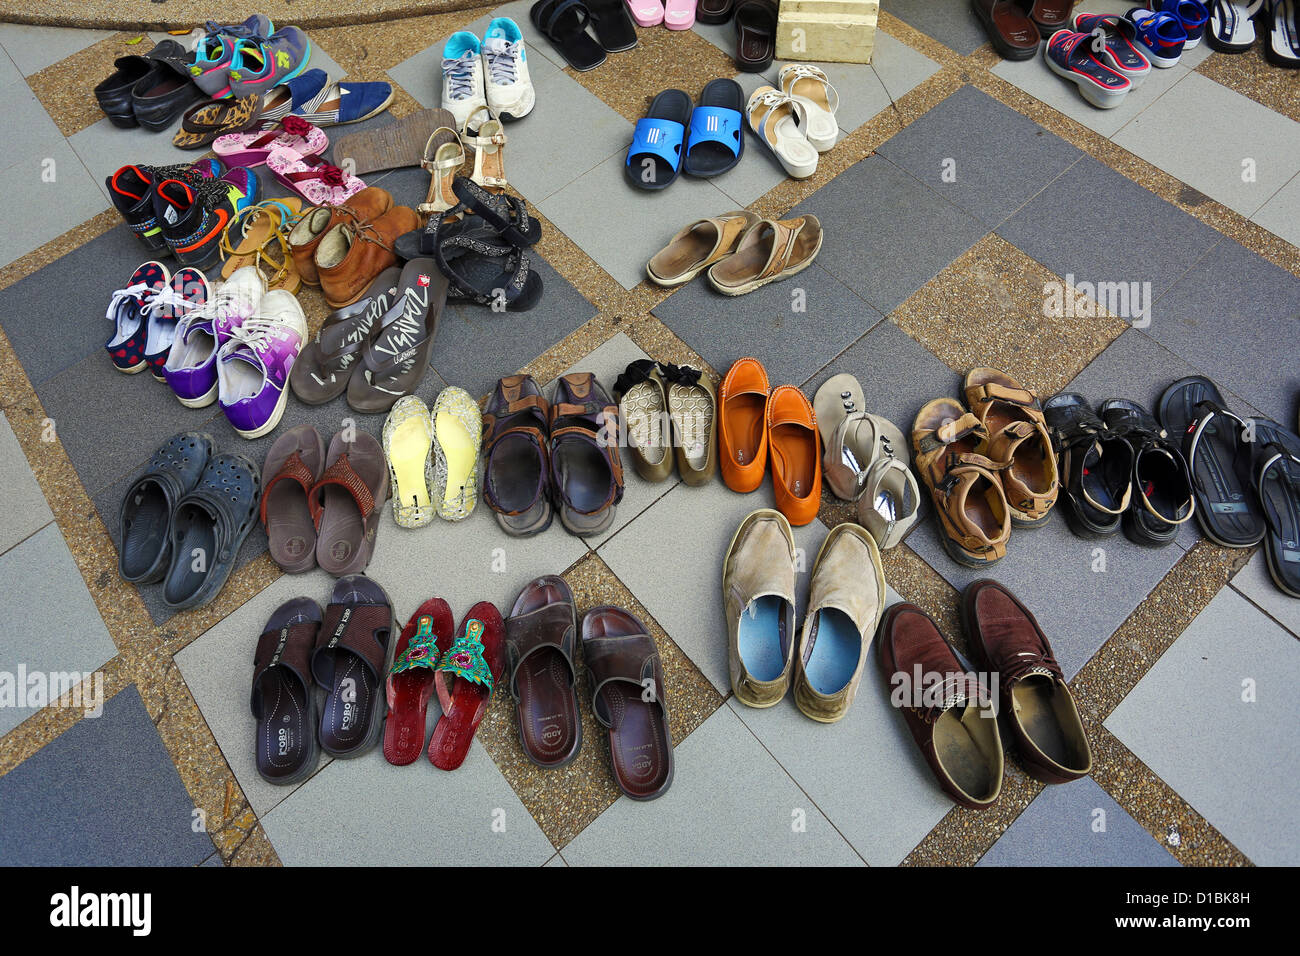 Pile of shoes left outside at Wat Prathat Doi Suthep temple, Chiang Mai, Thailand Stock Photo